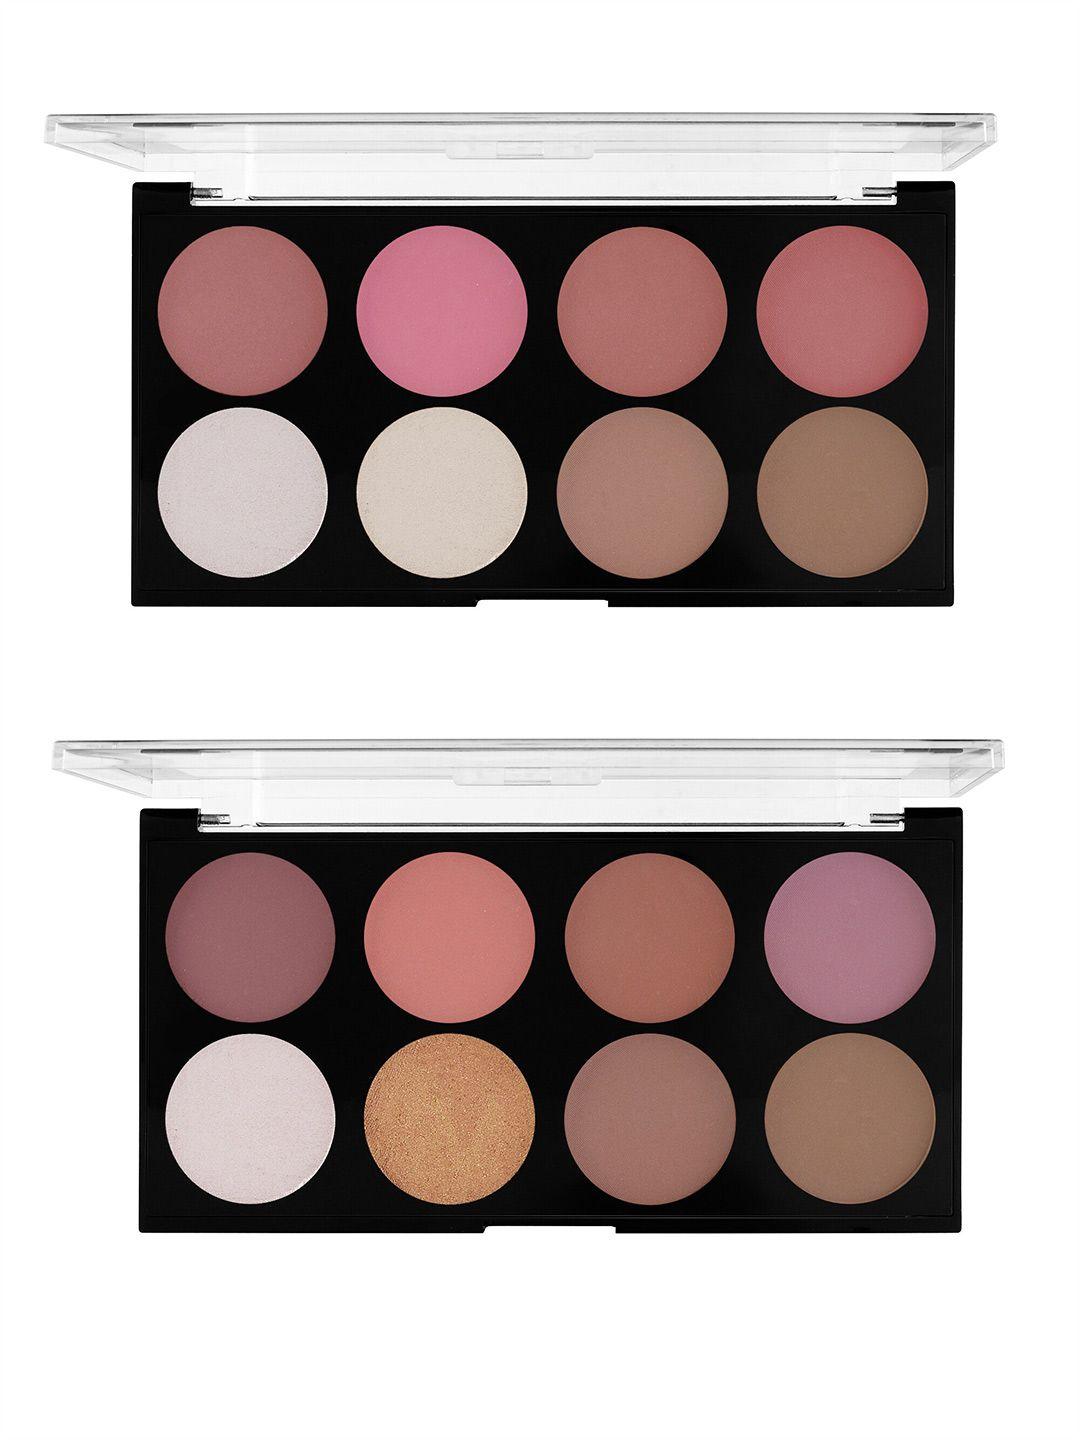 mars-fantasy-set-of-2-16-shade-blusher-palette-with-highlighter-and-bronzer-20g-each-02-03